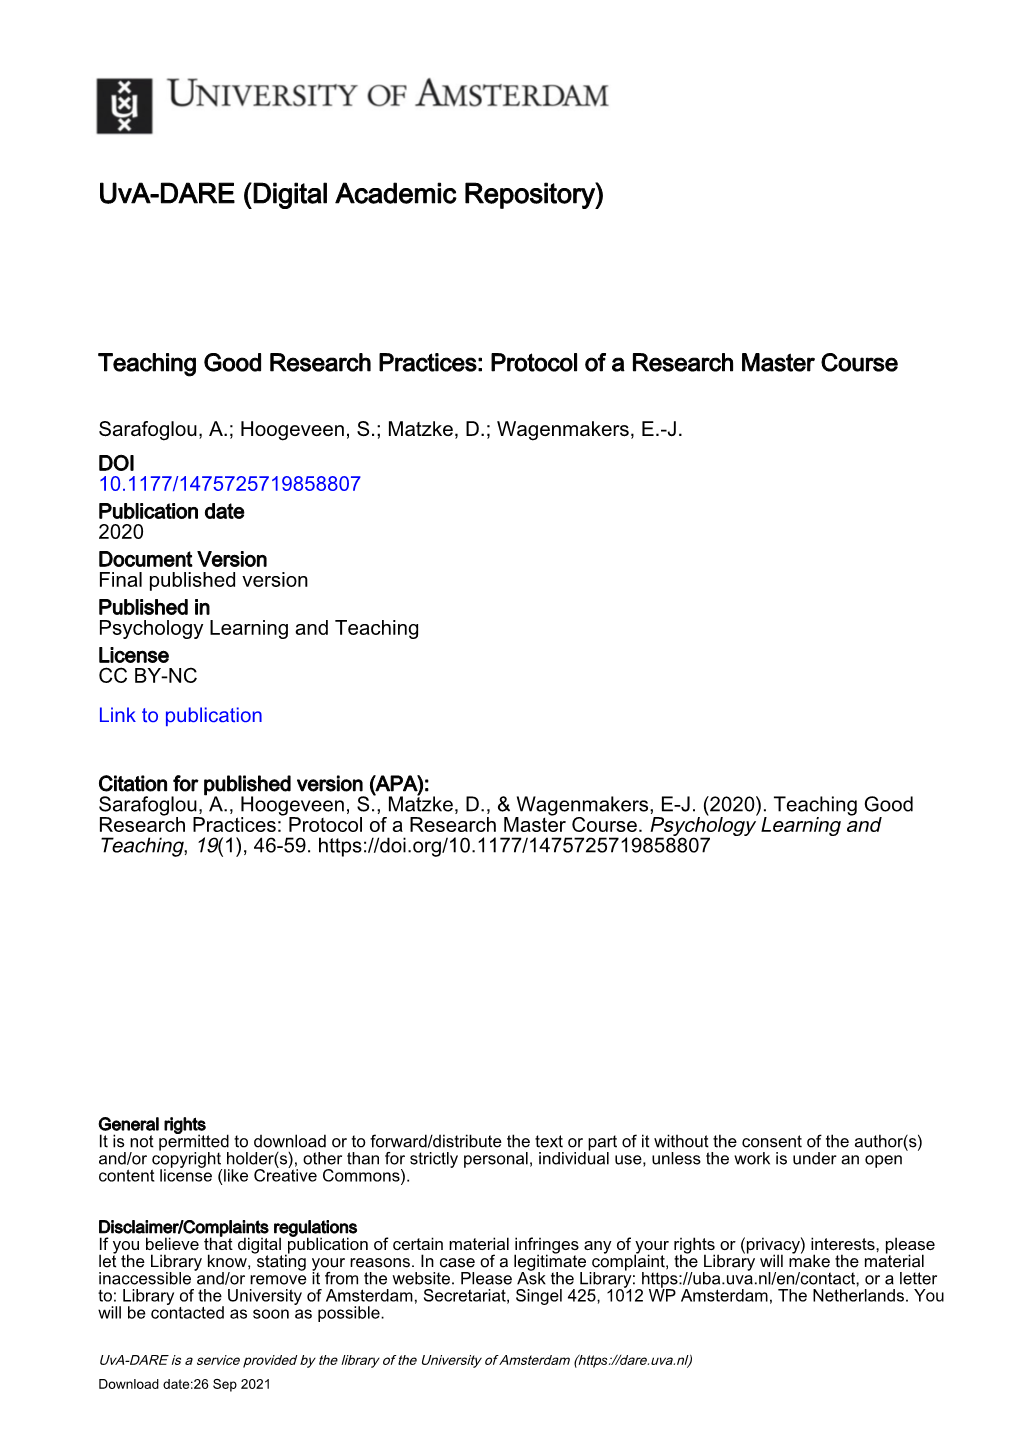 Teaching Good Research Practices: Protocol of a Research Master Course